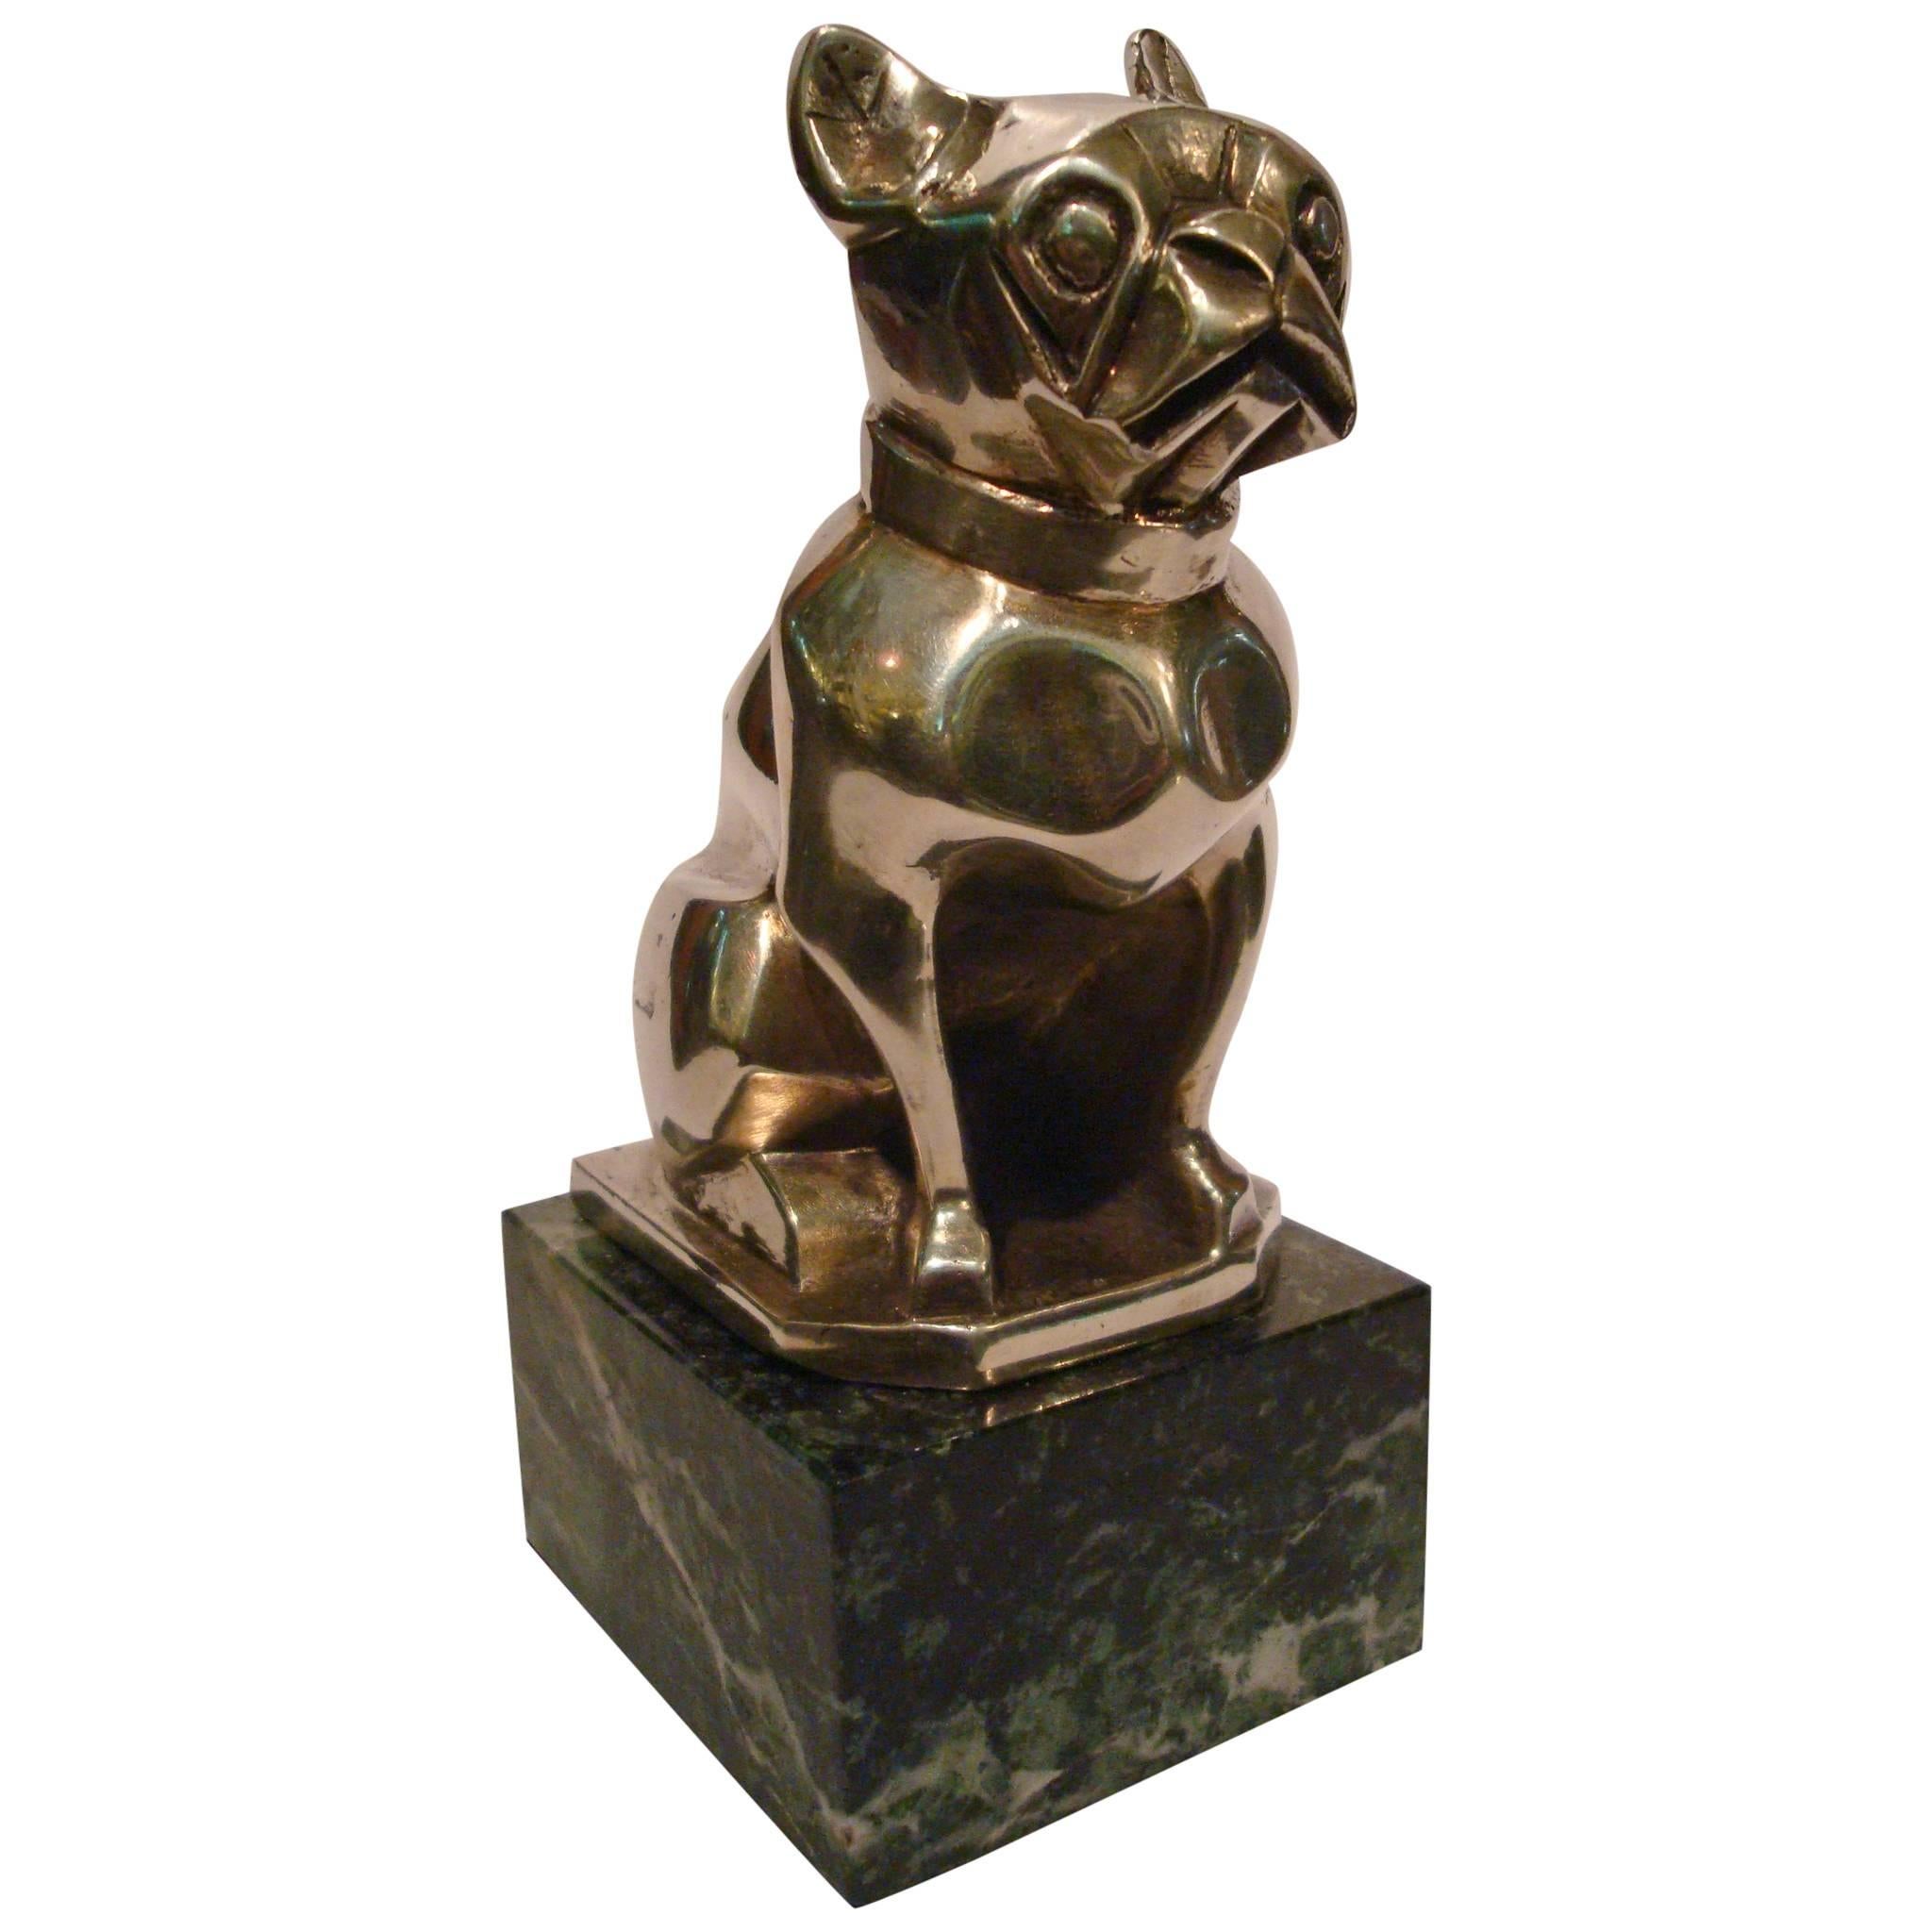 Art Deco French Bulldog Bookend or Paperweight, France, 1925